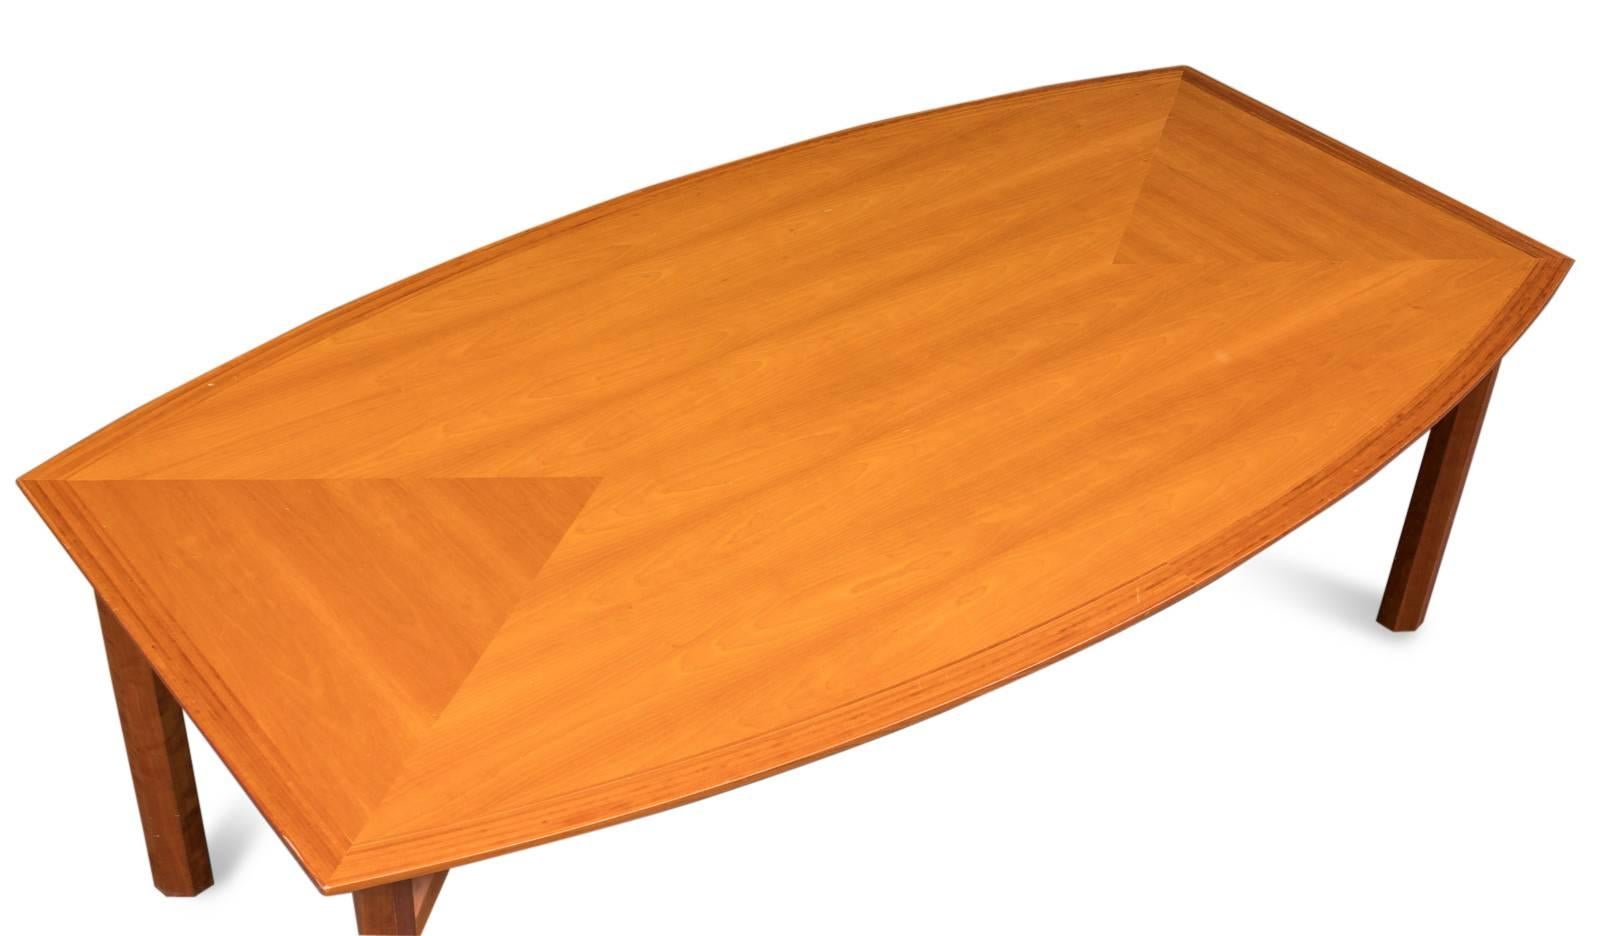 Rud Thygesen and Johnny Sørensen , table in cherry with lacquered finish on the worktop. 
Made by Fredericia Furniture, 
model 7838. 
H. 72.5 cm, L. 206 cm, B. 113 cm. 
Presence of some scratches.